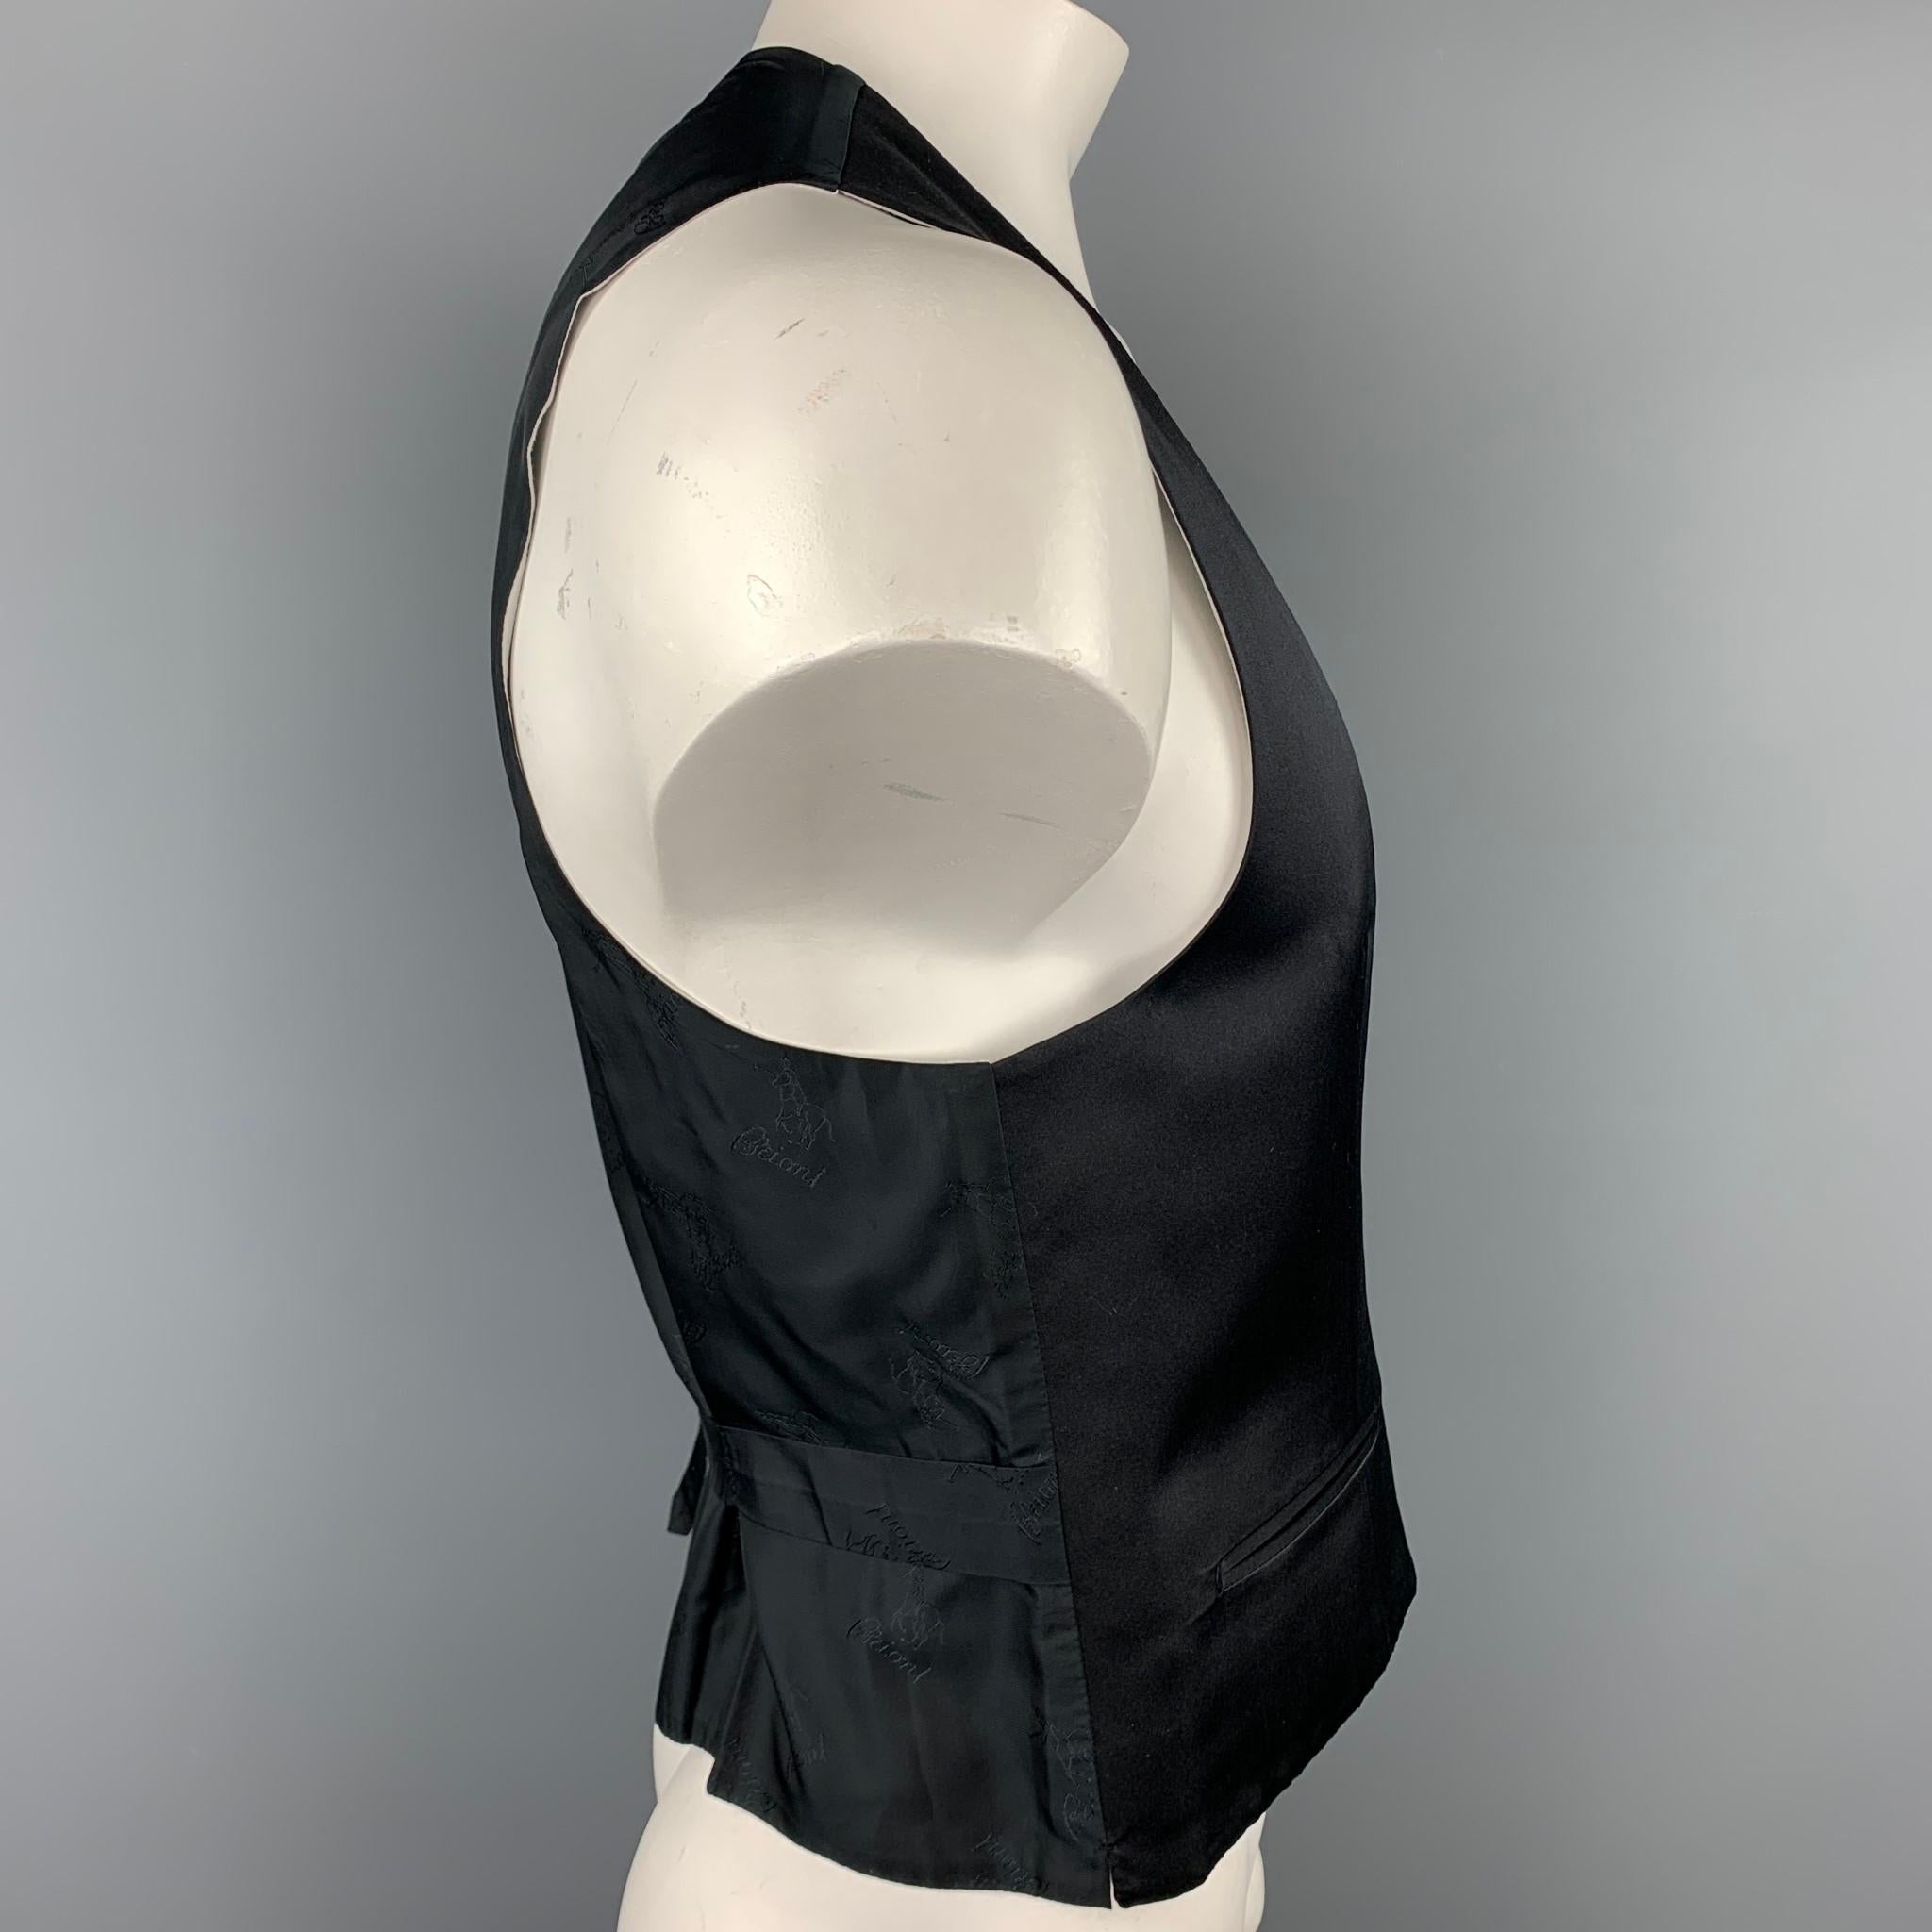 BRIONI formal vest comes in a black silk featuring a deep v-neck, custom made fit, slit pockets, and a buttoned closure.

Very Good Pre-Owned Condition.
Marked: 44 R

Measurements:

Shoulder: 15 in.
Chest: 41 in.
Length: 22.5 in. 